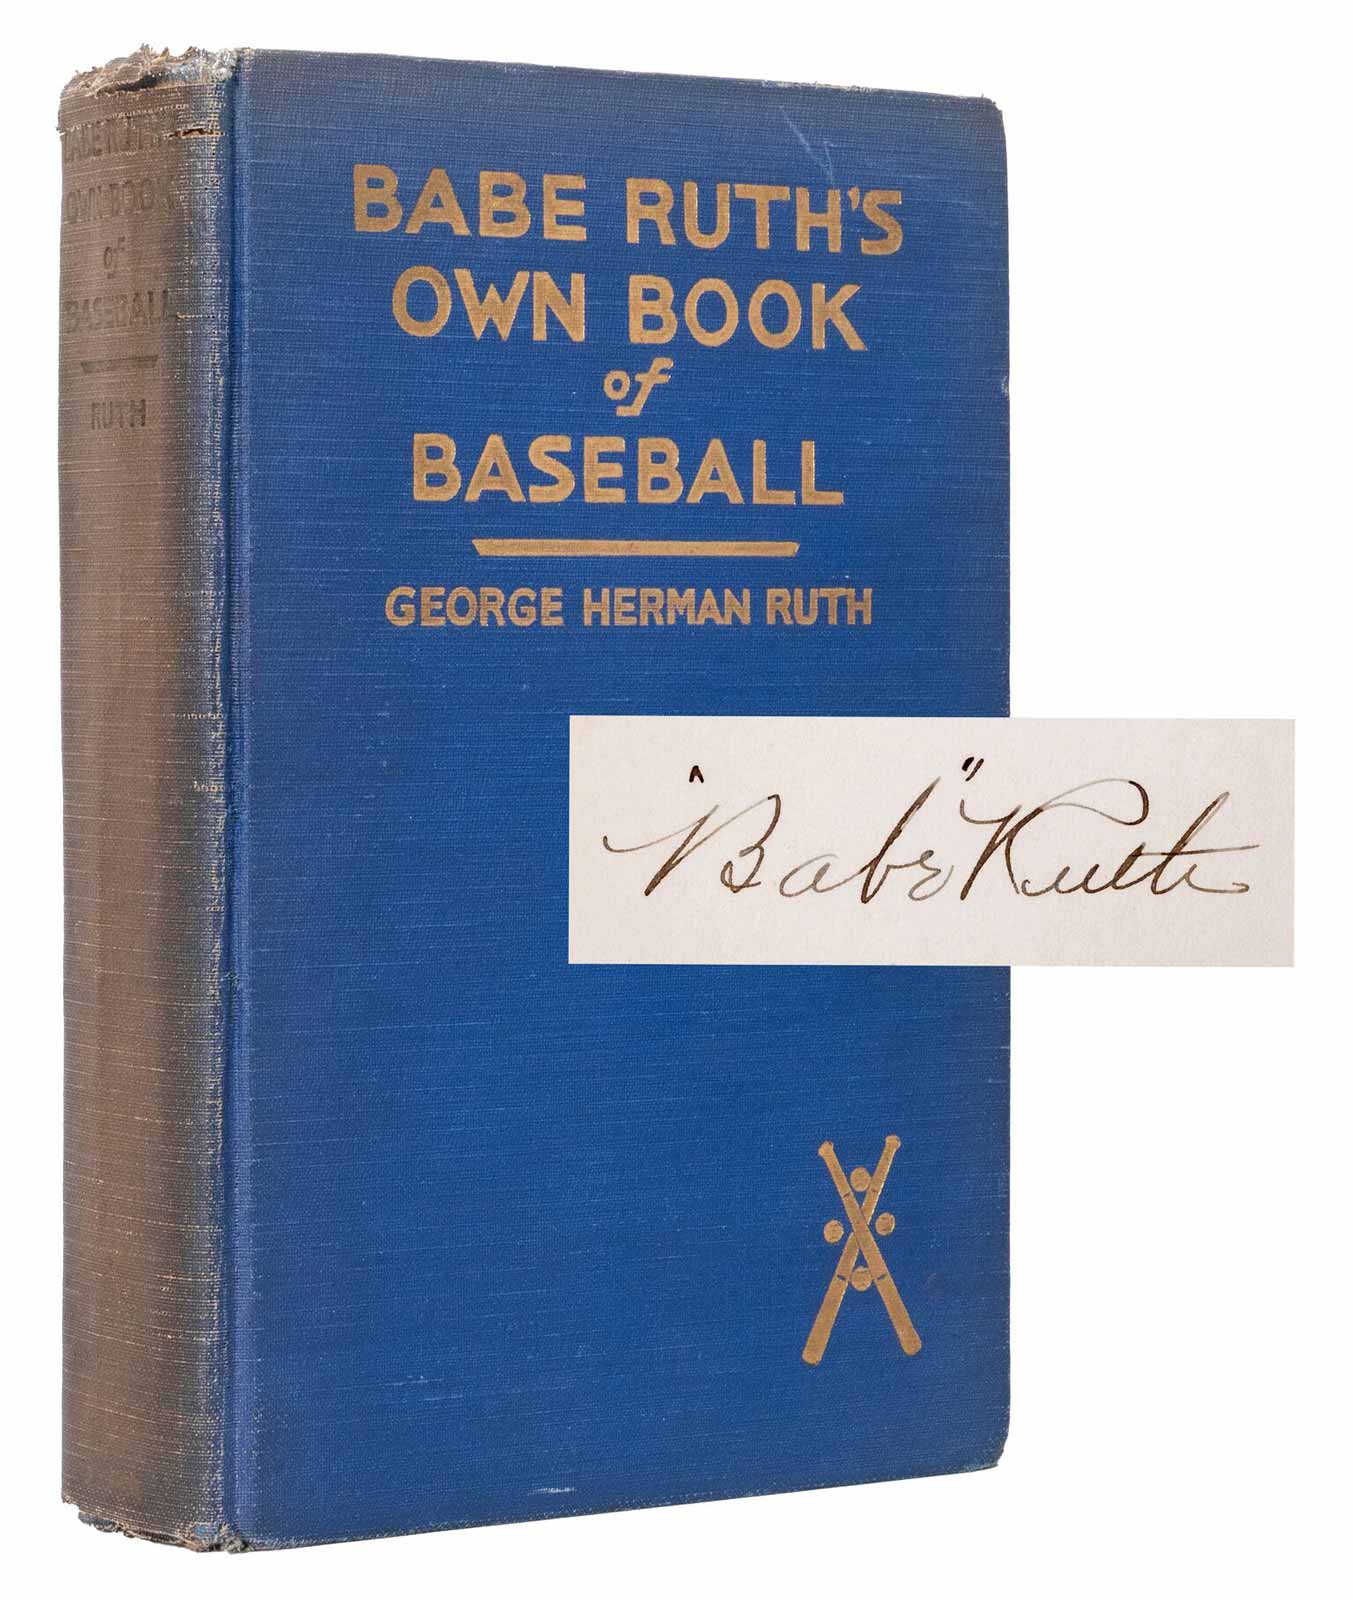 Babe Ruth’s Own Book of Baseball